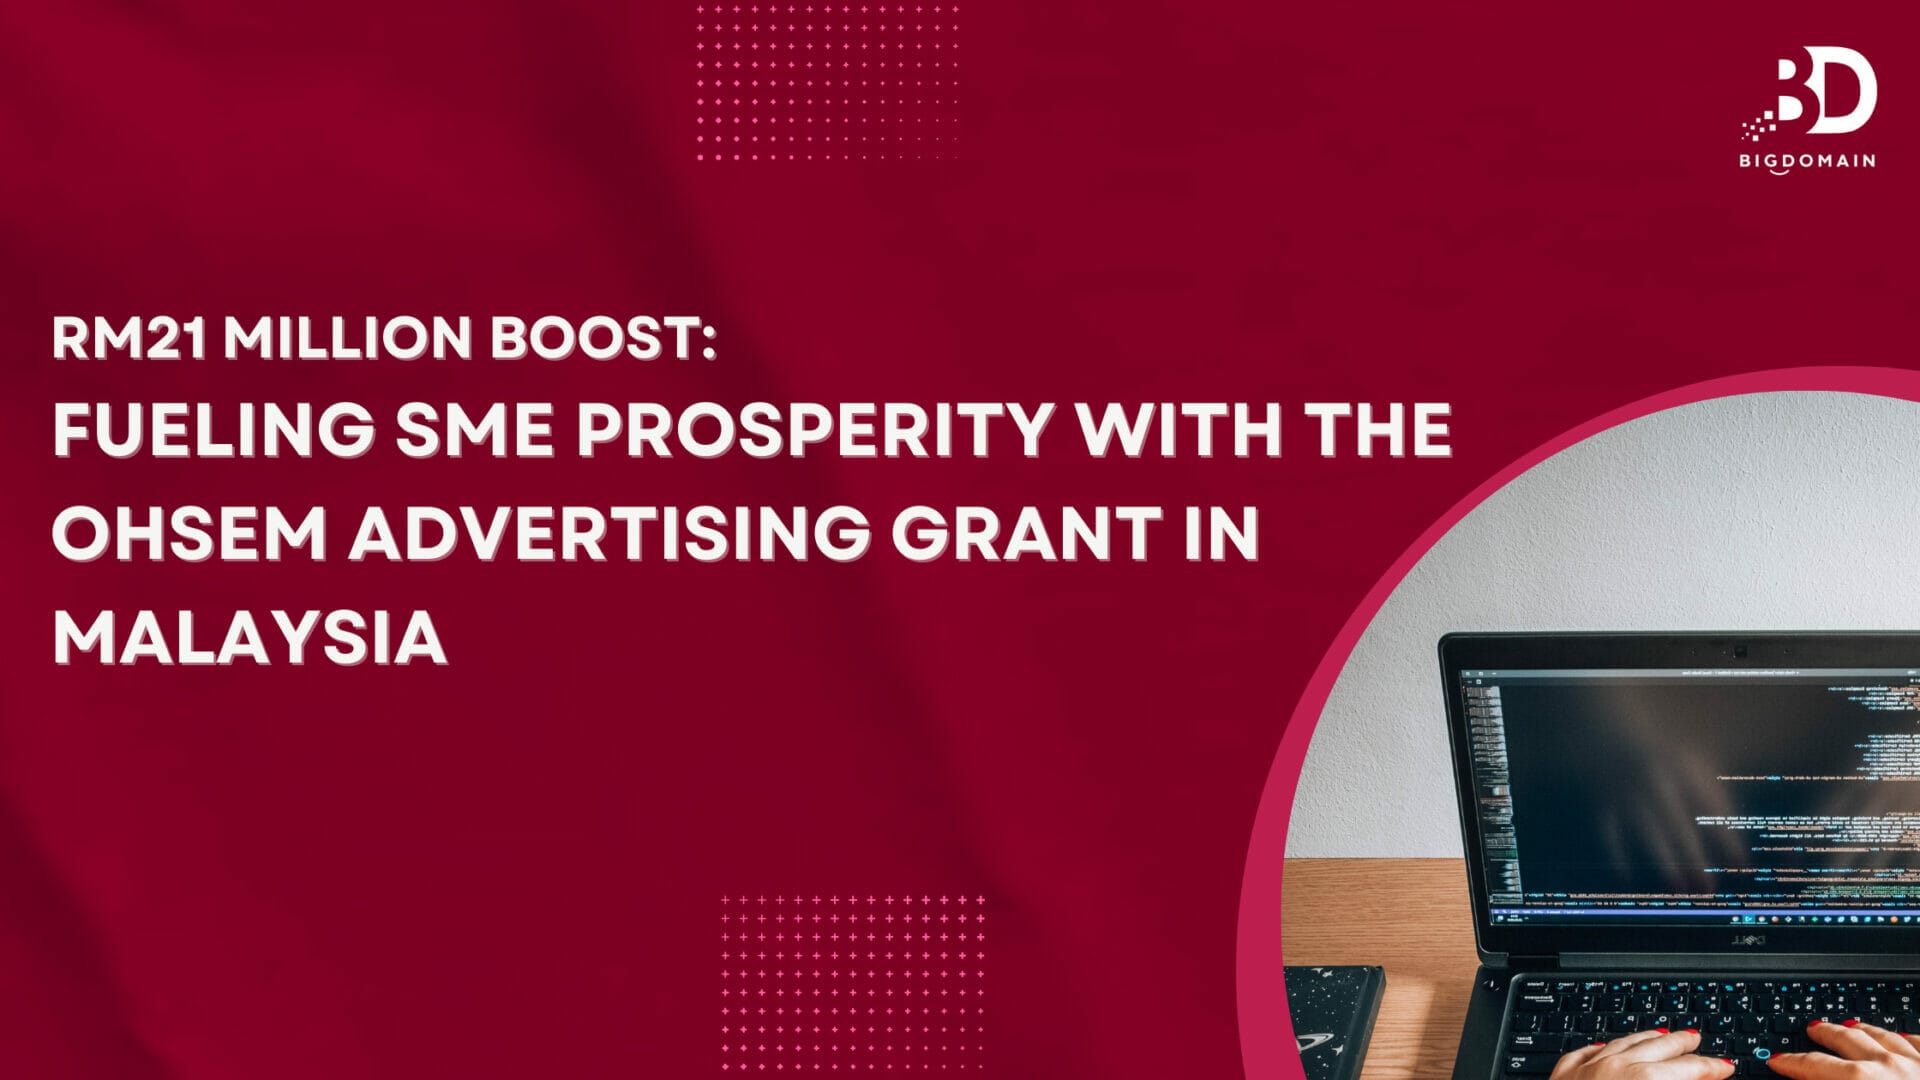 RM21 Million Boost: Fueling SME Prosperity with the OHSEM Advertising Grant in Malaysia